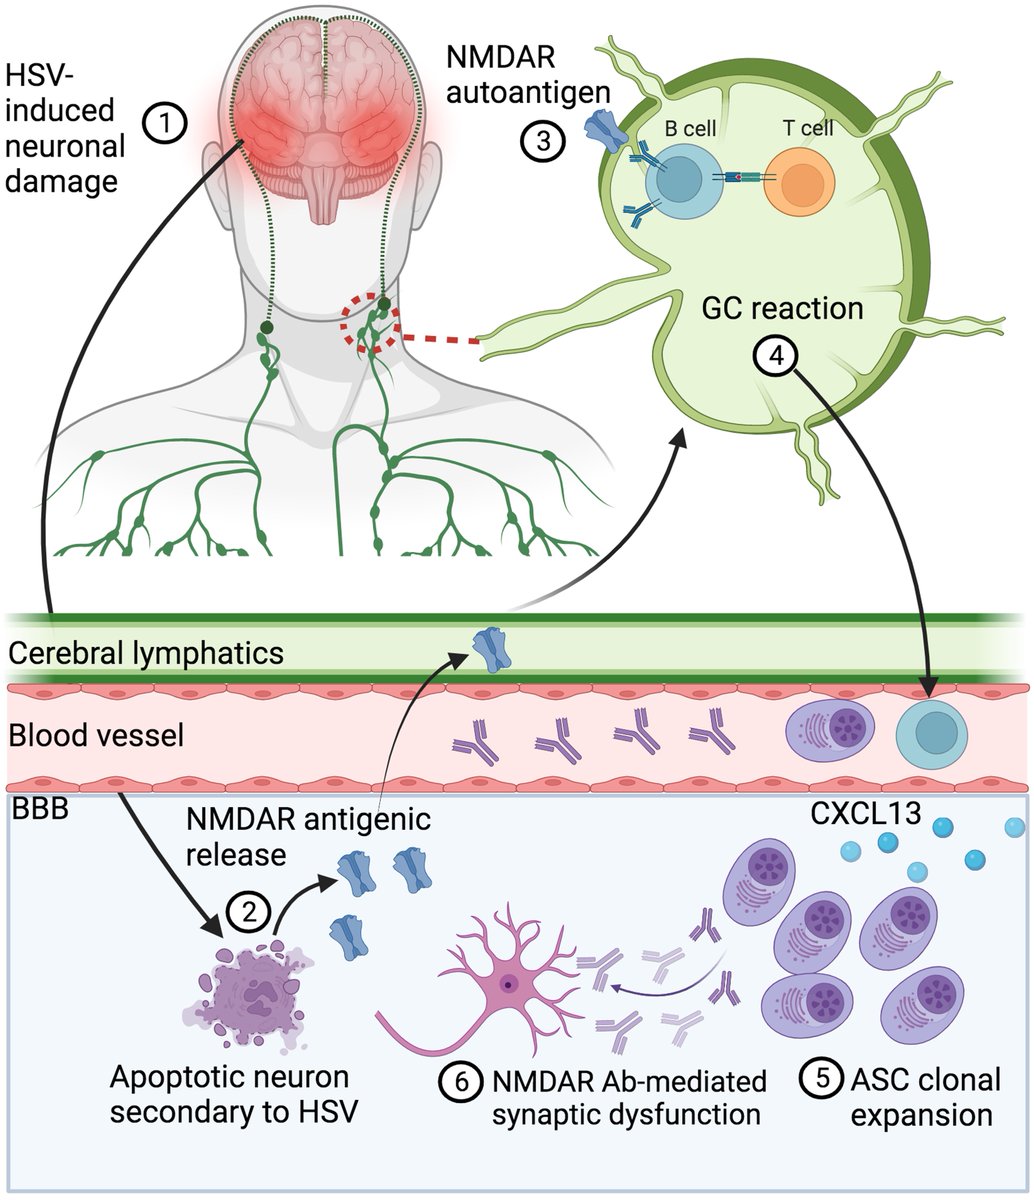 Cleaver et al. review the clinical presentation and immunobiology of brain disease caused by the herpes simplex virus, and discuss how relapses can be caused by immune reactions against neuronal proteins. tinyurl.com/p84u4xjd